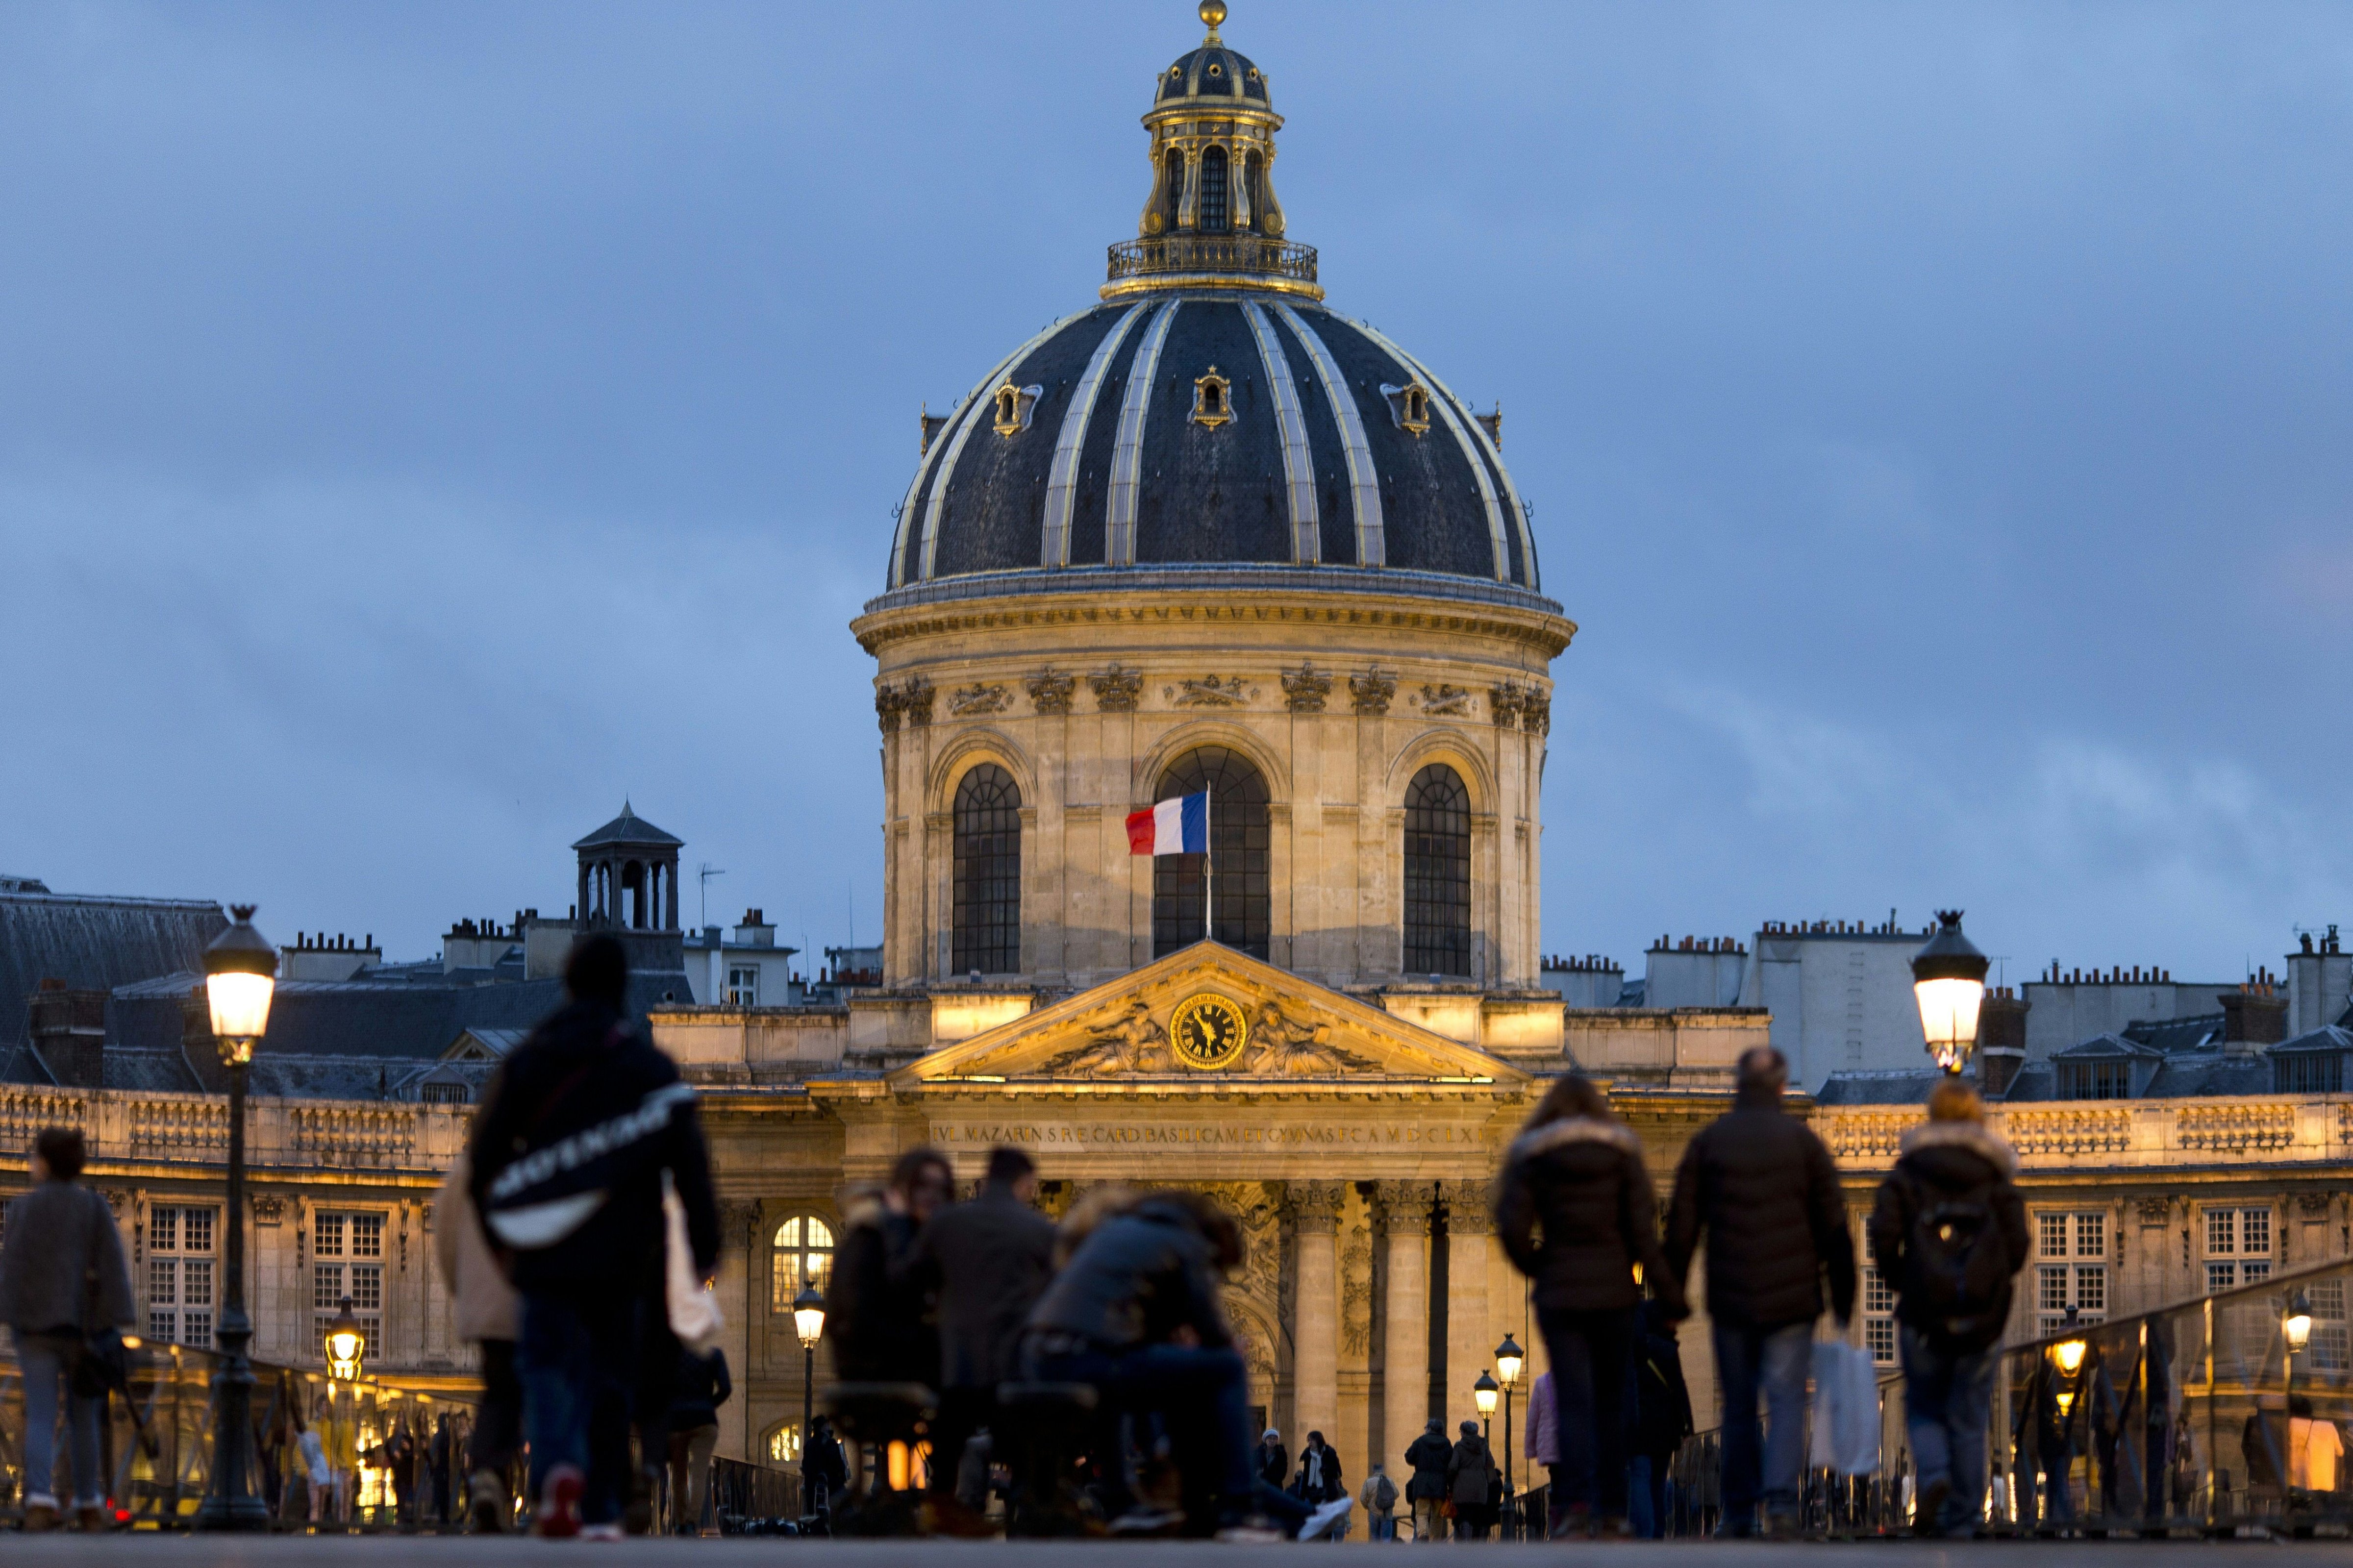 People walk on a bridge in front of the Institut de France building which houses the Academie Francaise in Paris on Feb. 1. (KENZO TRIBOUILLARD—AFP/Getty Images)